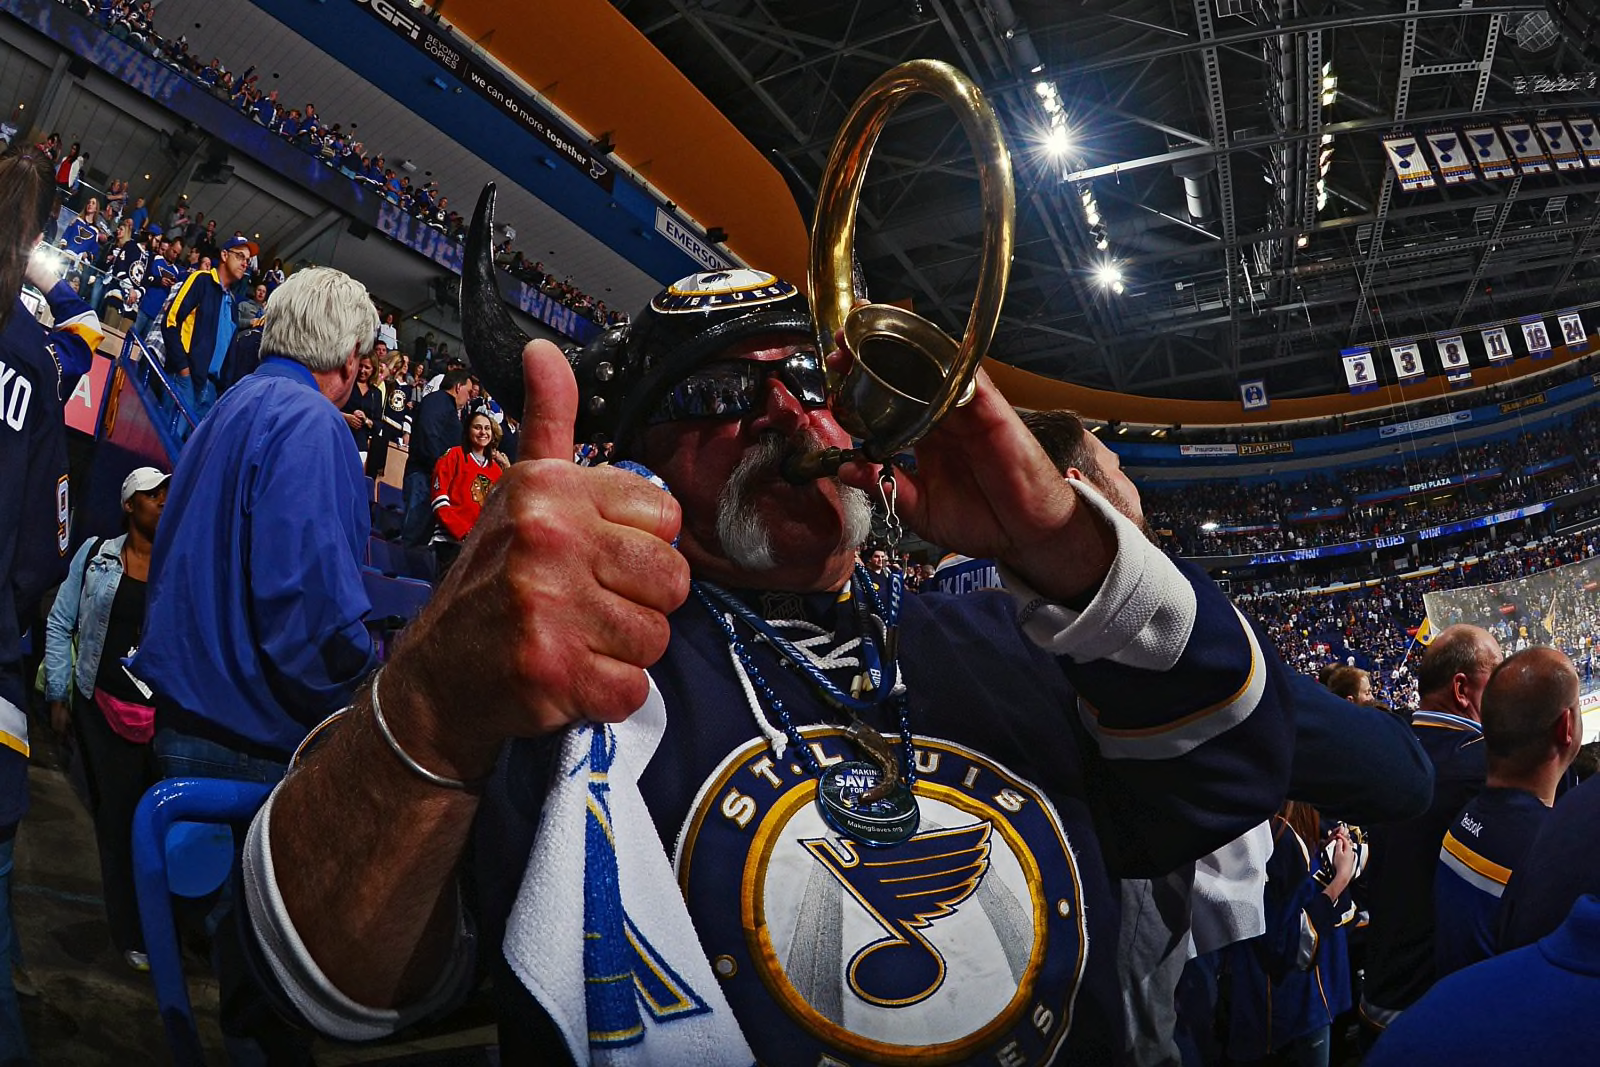 So when will the Blues' awesome 3rd jersey replace current one?